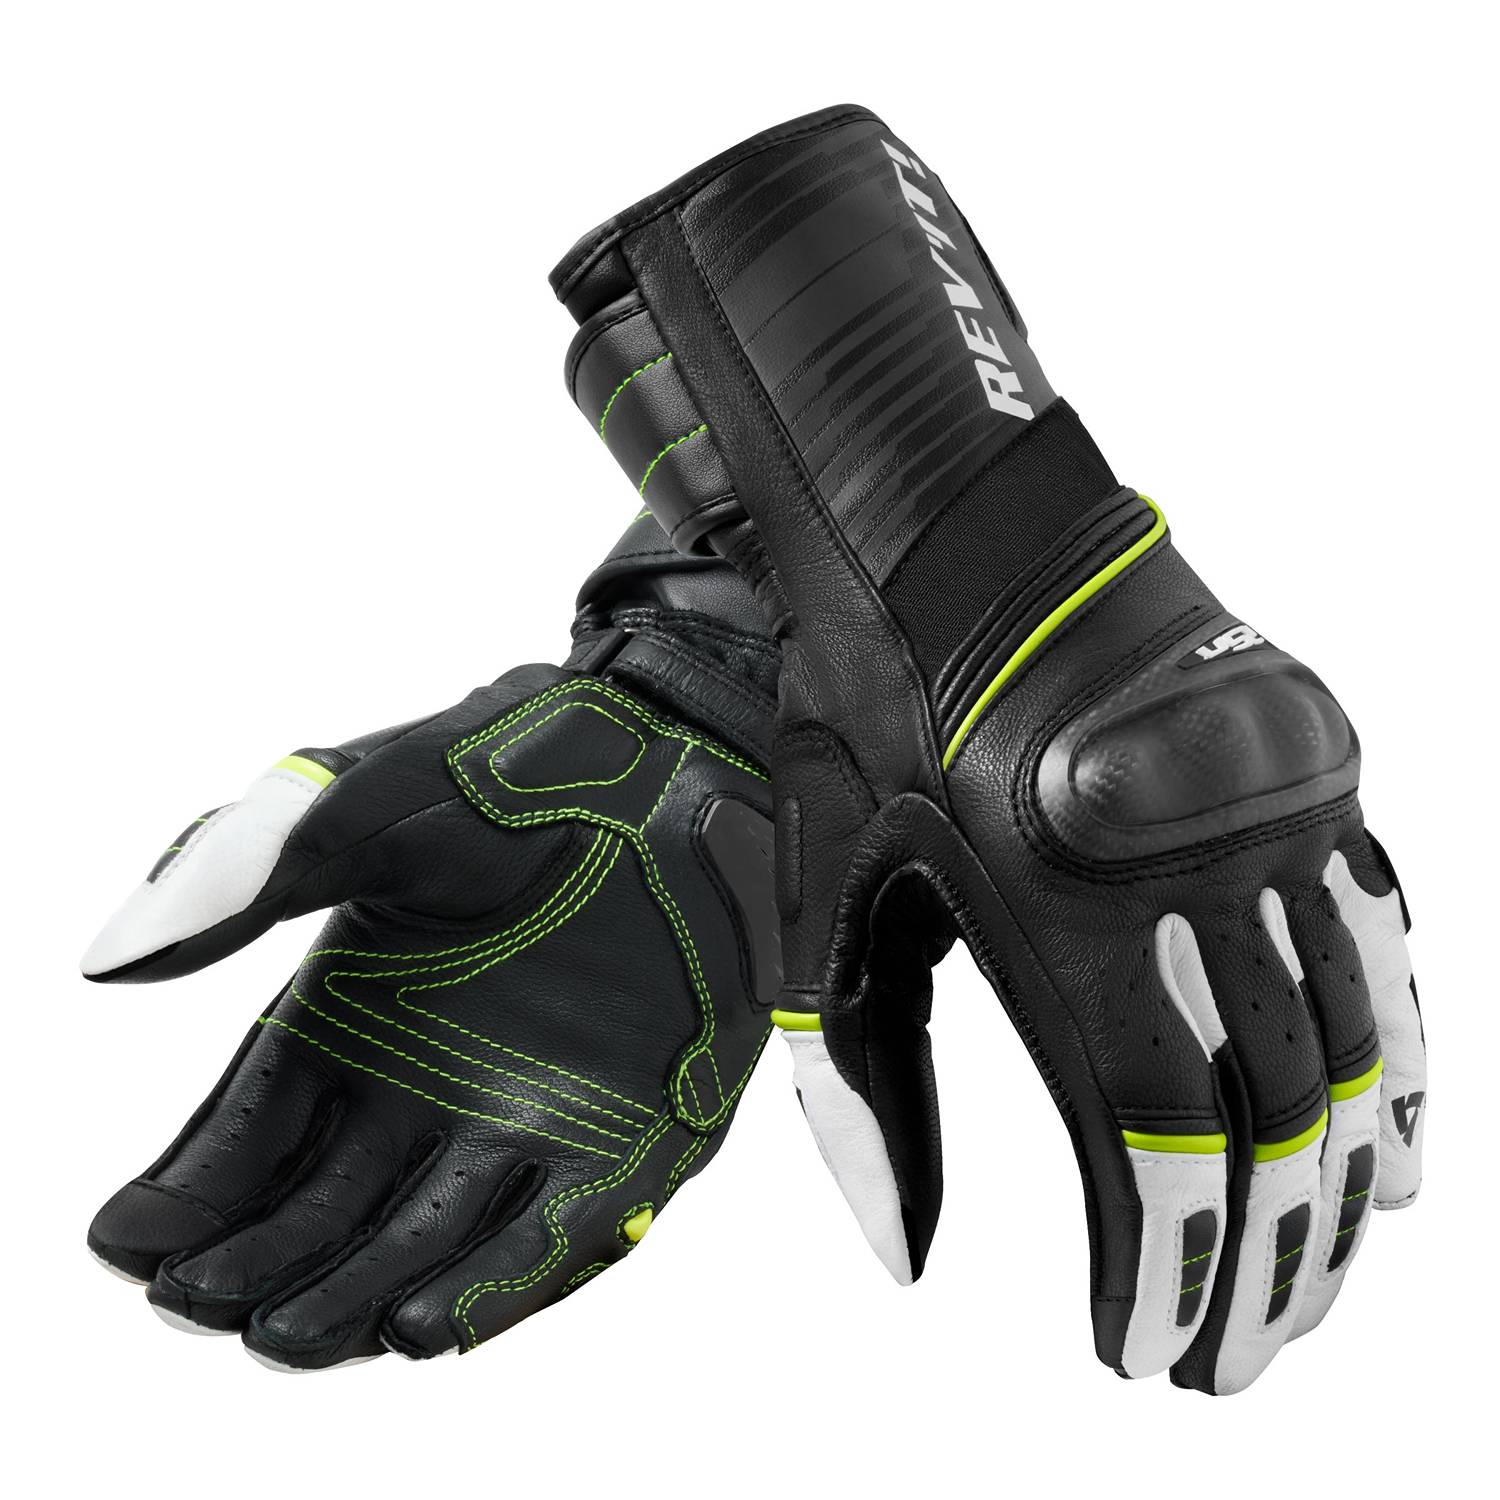 Image of REV'IT! RSR 4 Black Gloves Neon Yellow Size XL ID 8700001306829